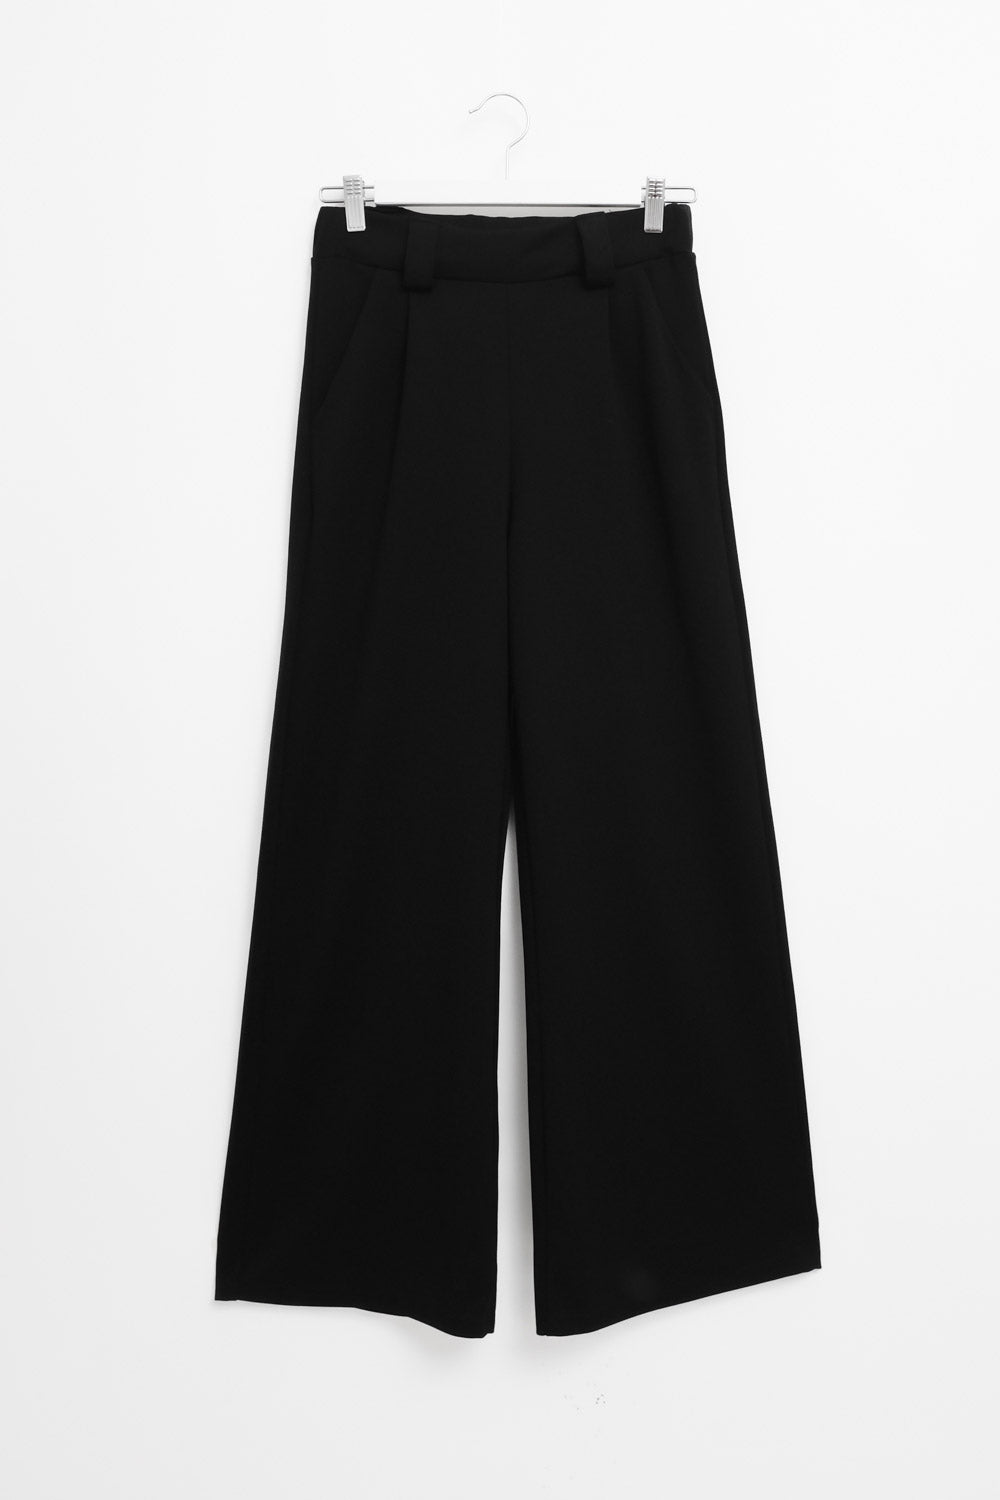 0065_RELAX BLACK WIDE LEG ITALY PANTS